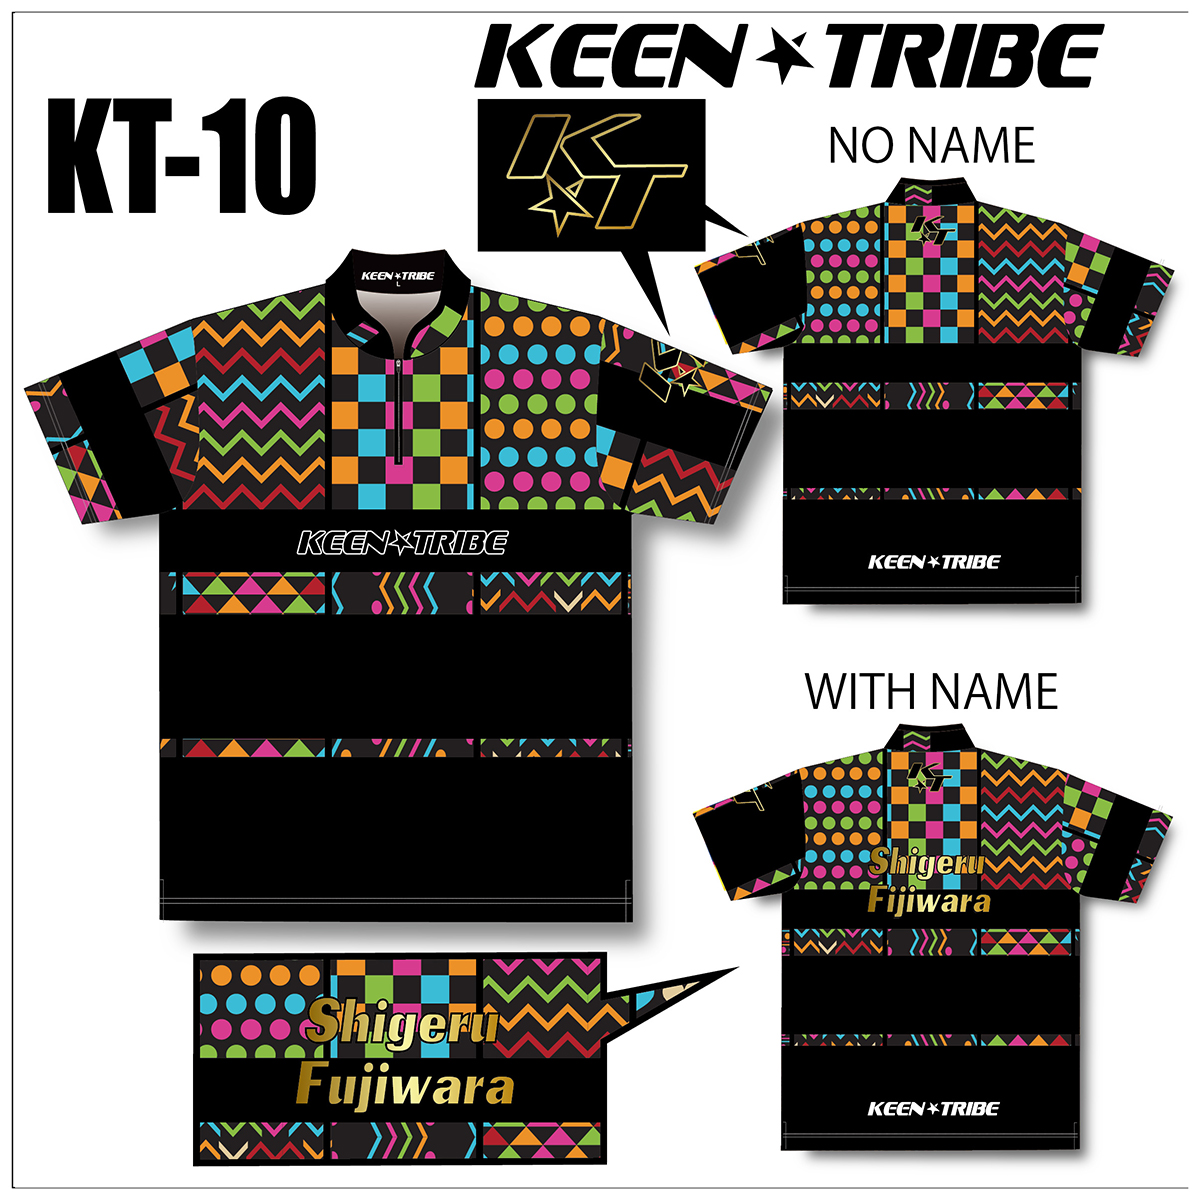 KEEN ★ TRIBE　KT-10(受注生産)